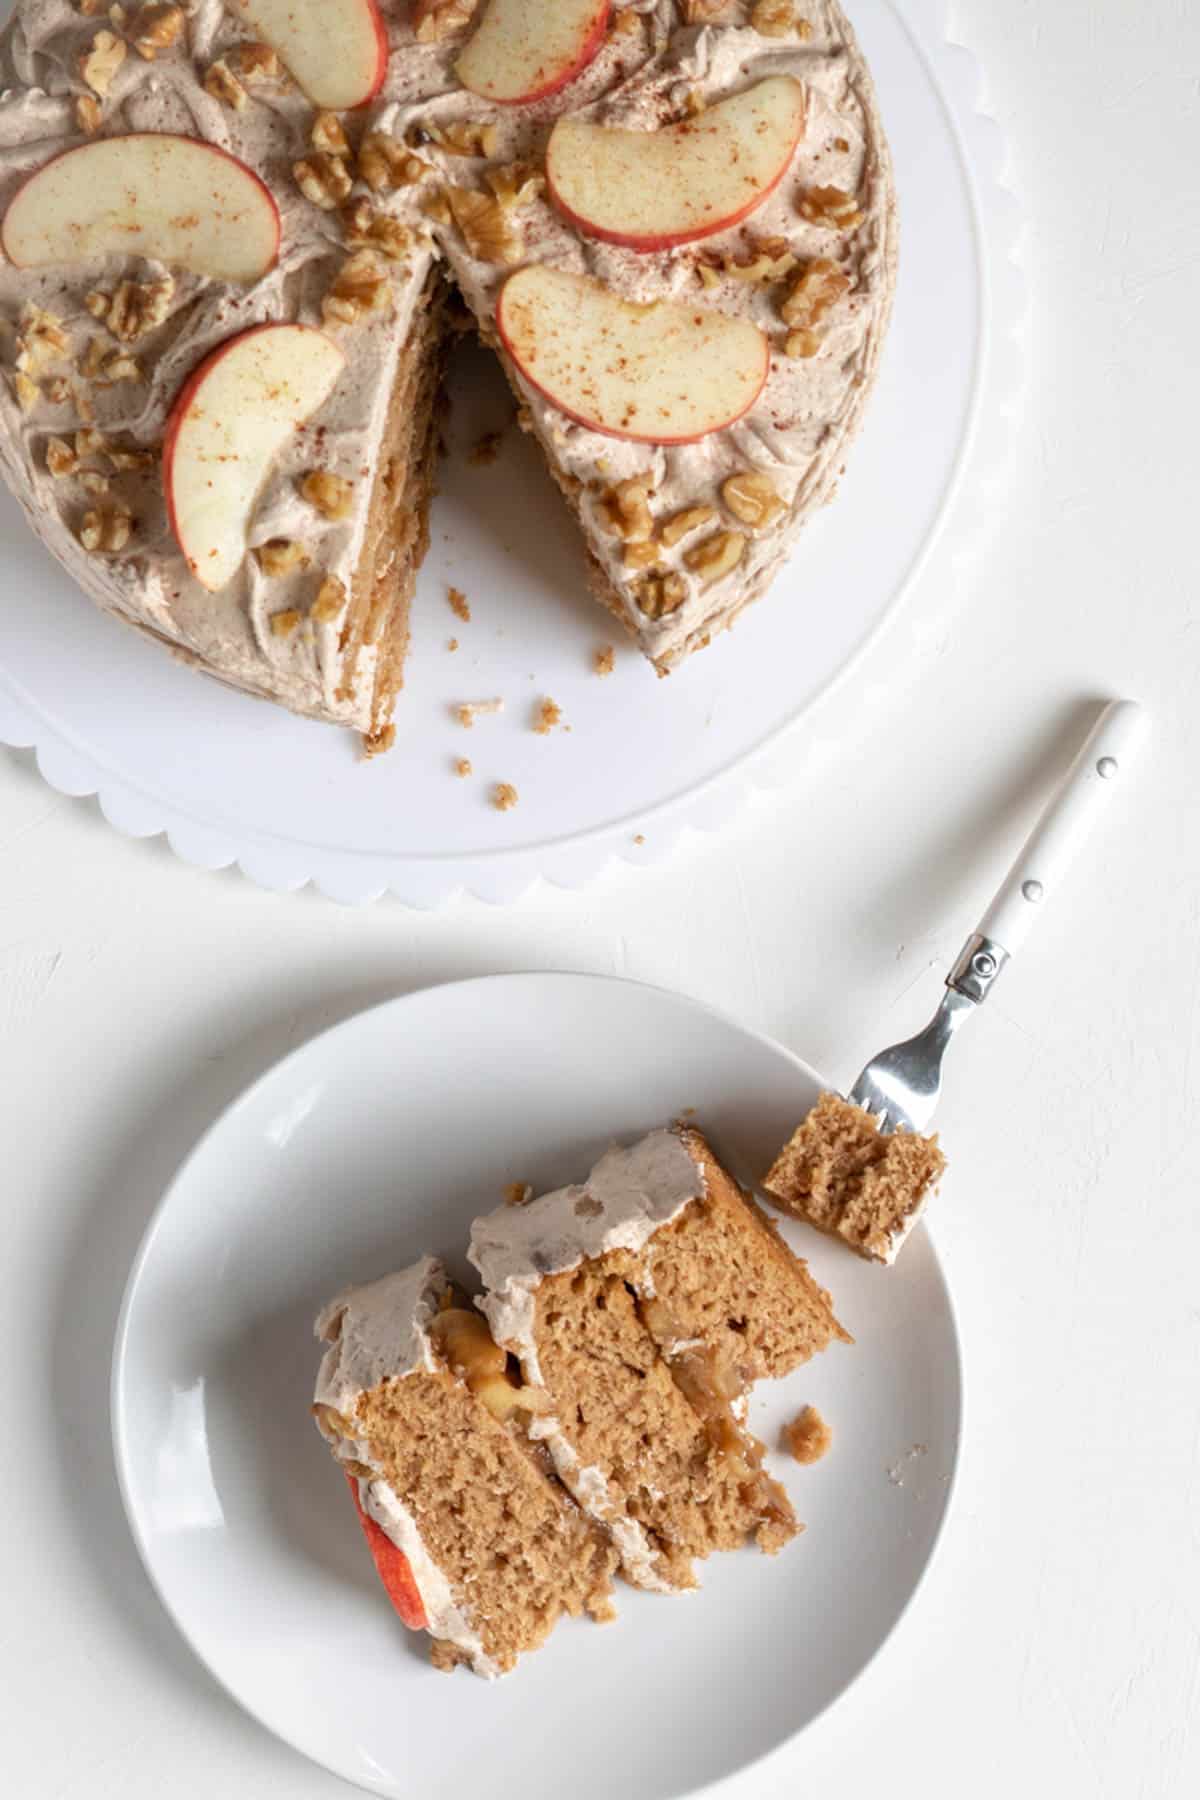 a slice of apple layer cake on a plate with a bite on a fork and the whole cake next to the plate.